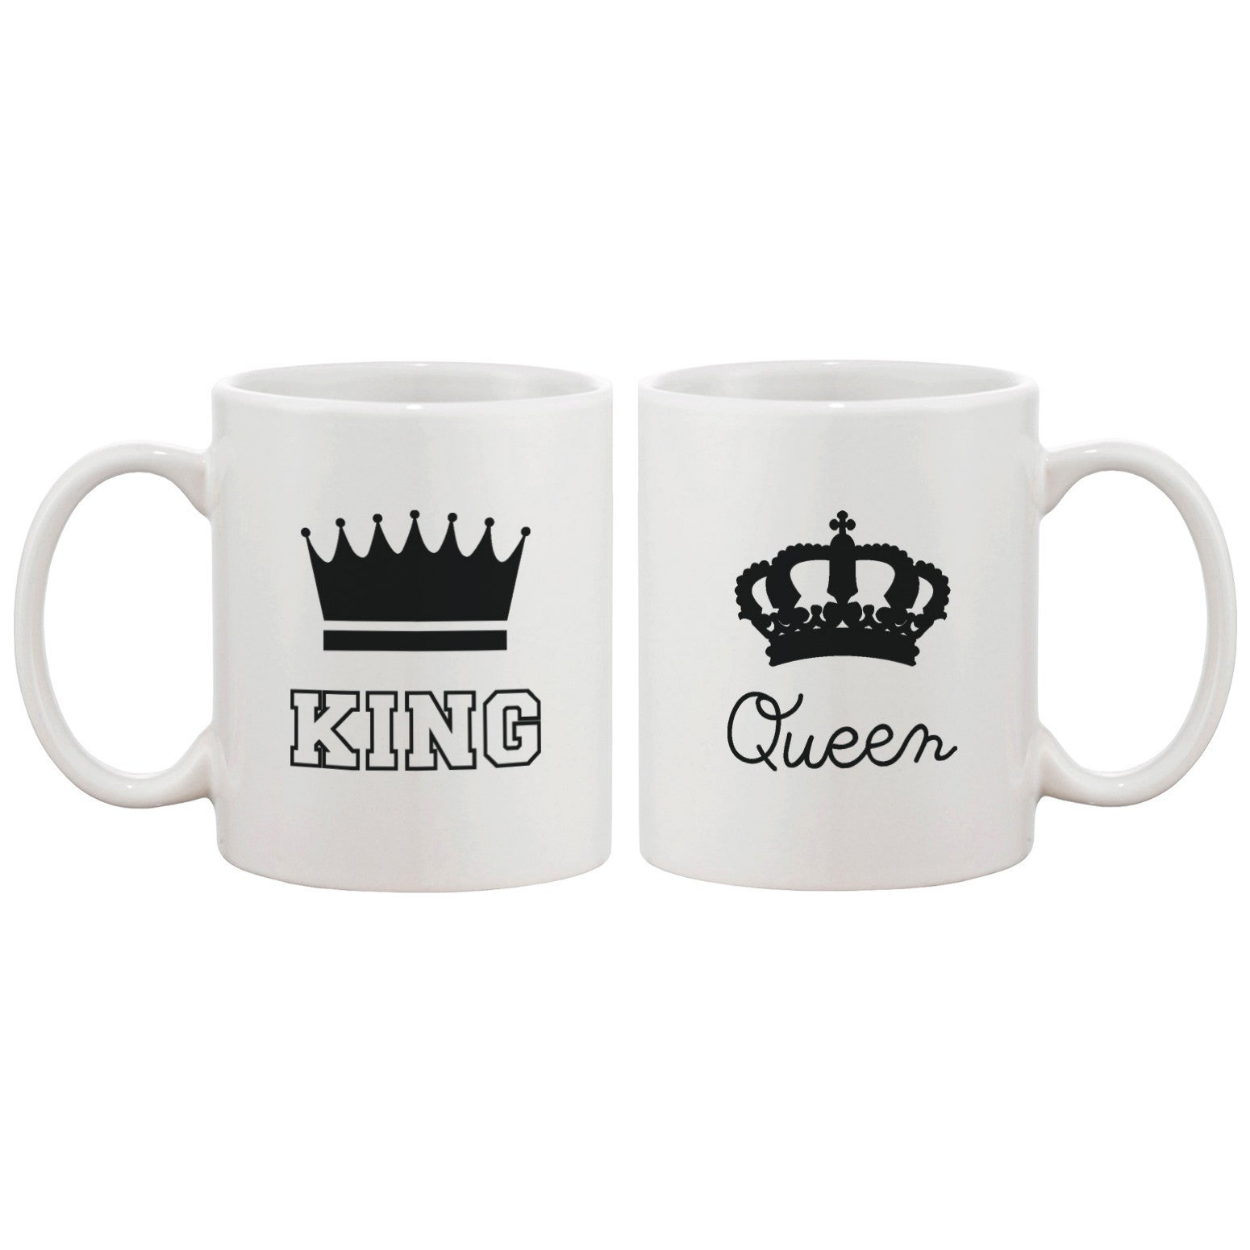 King and Queen Couple Coffee Mug- Matching Ceramic Mugs Gift for Couples White